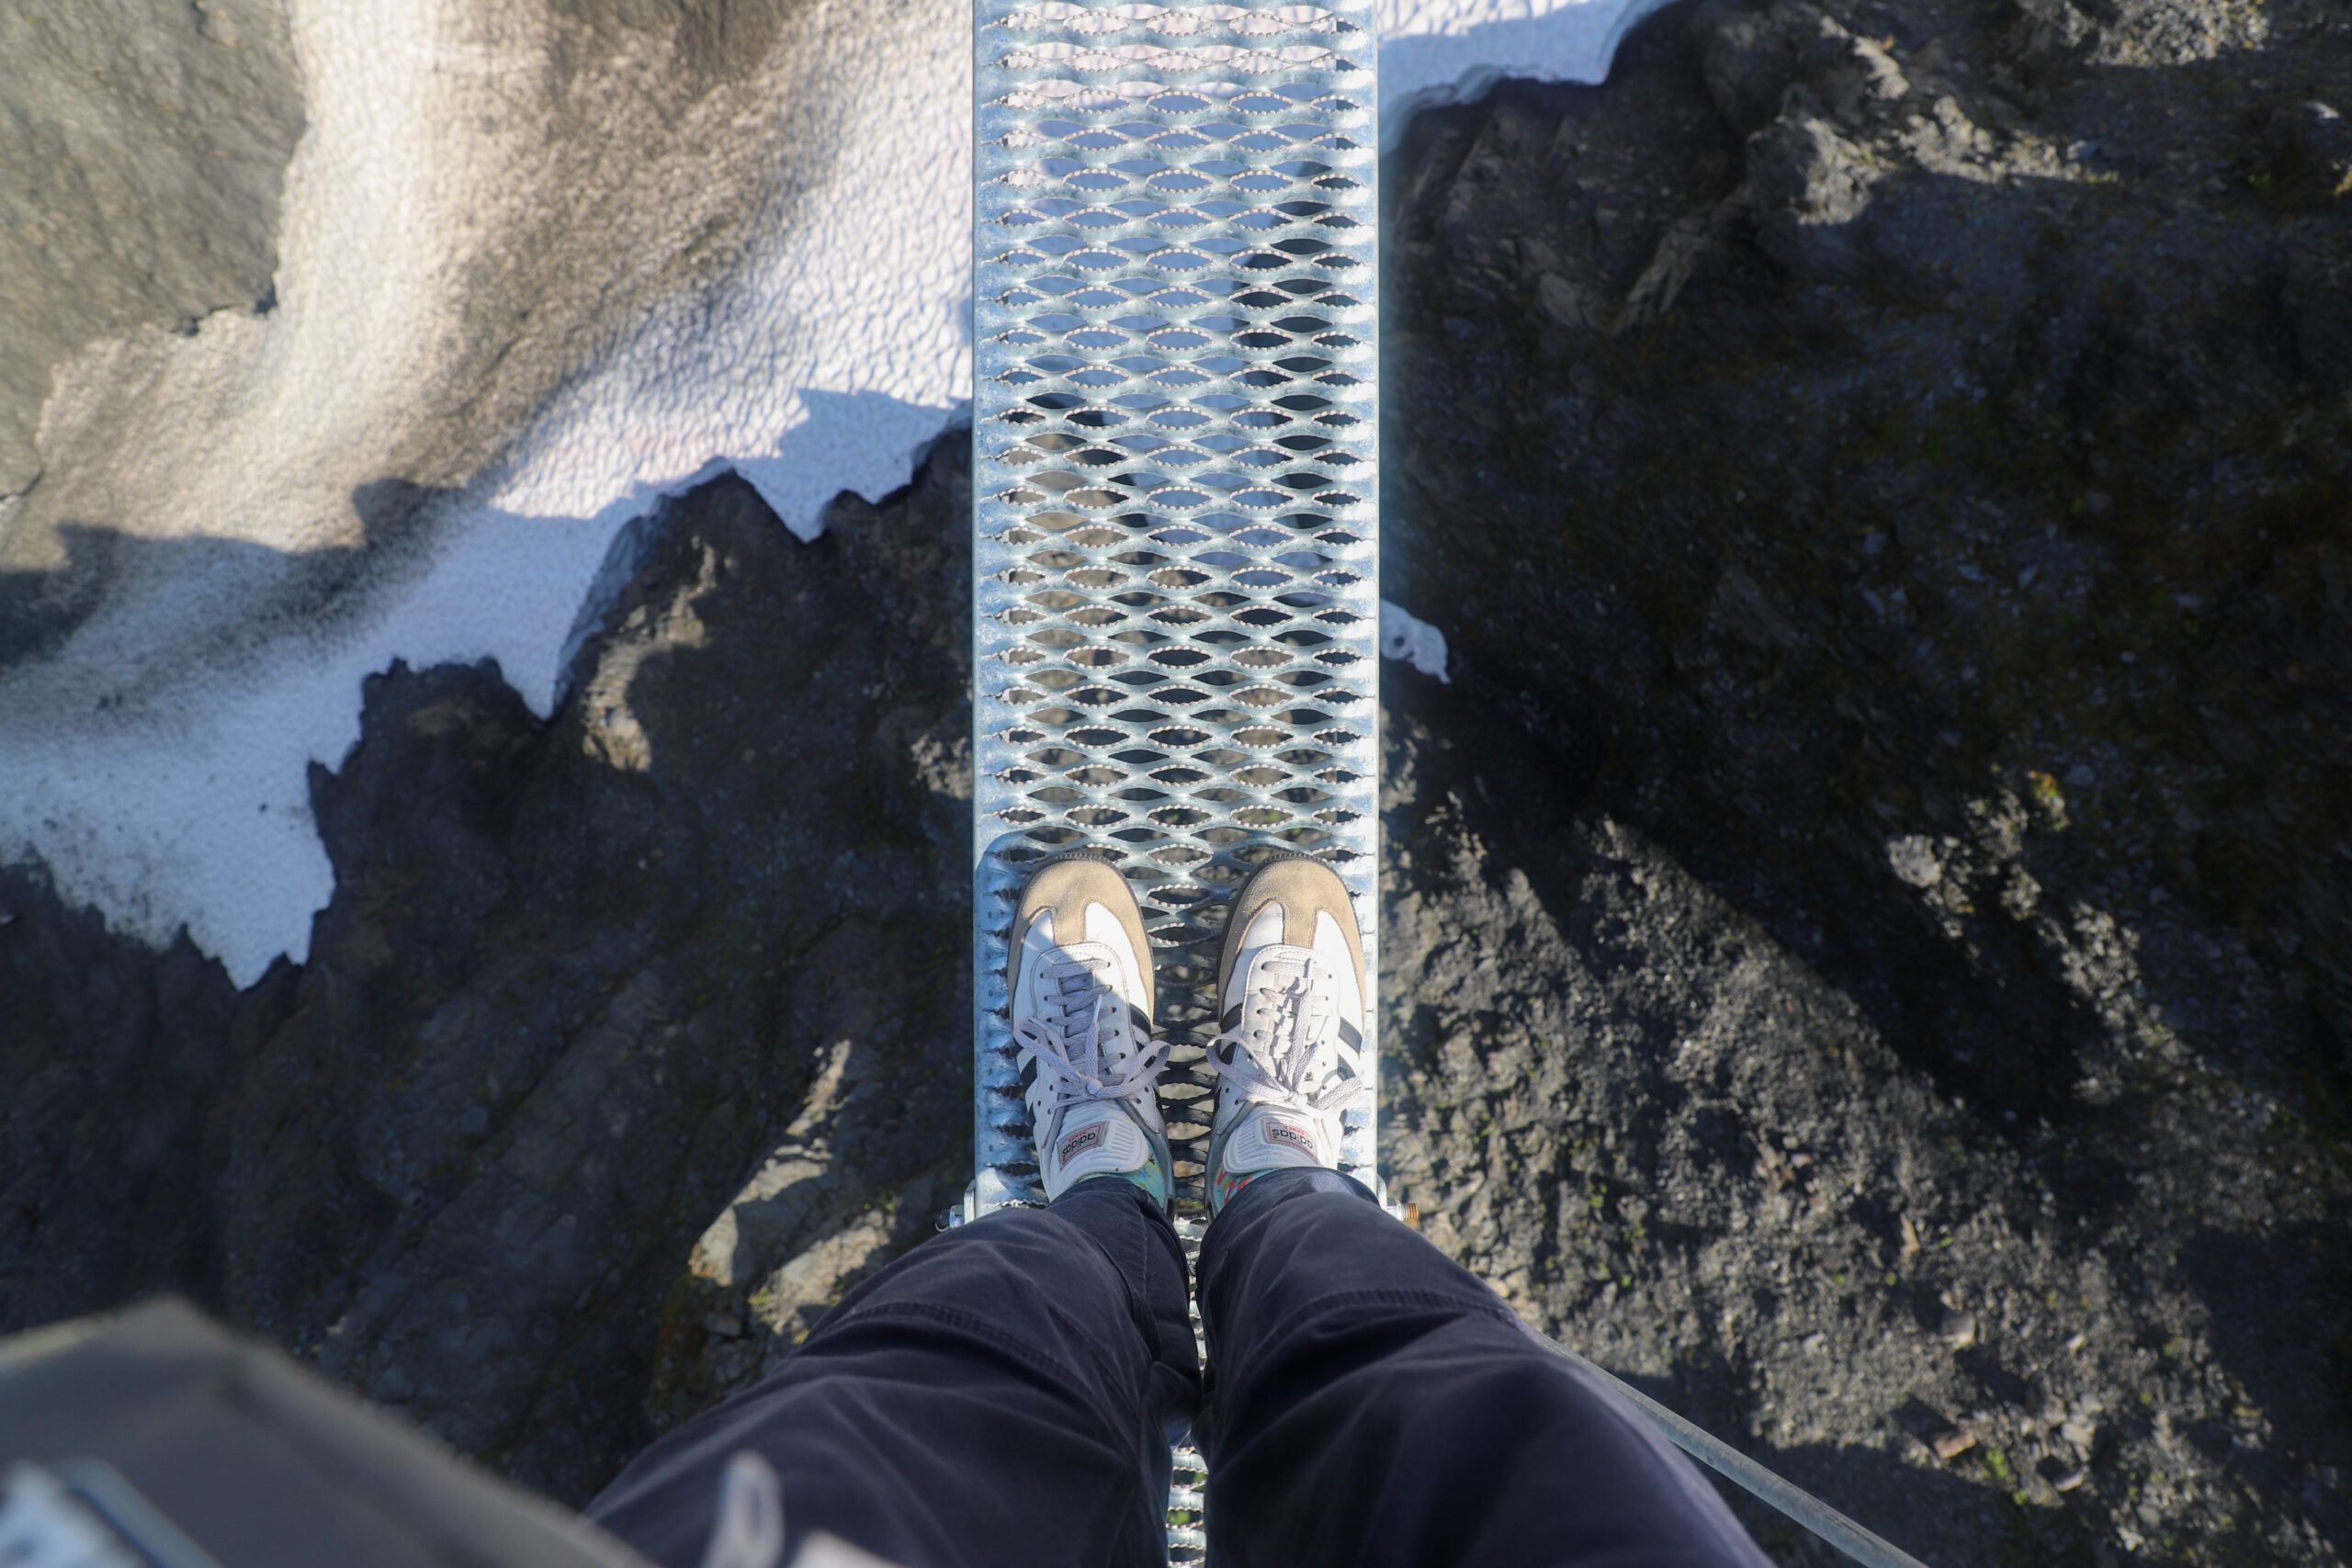 A person stands on a narrow bridge, looking down. It's only slightly wider than their two feet side by side.